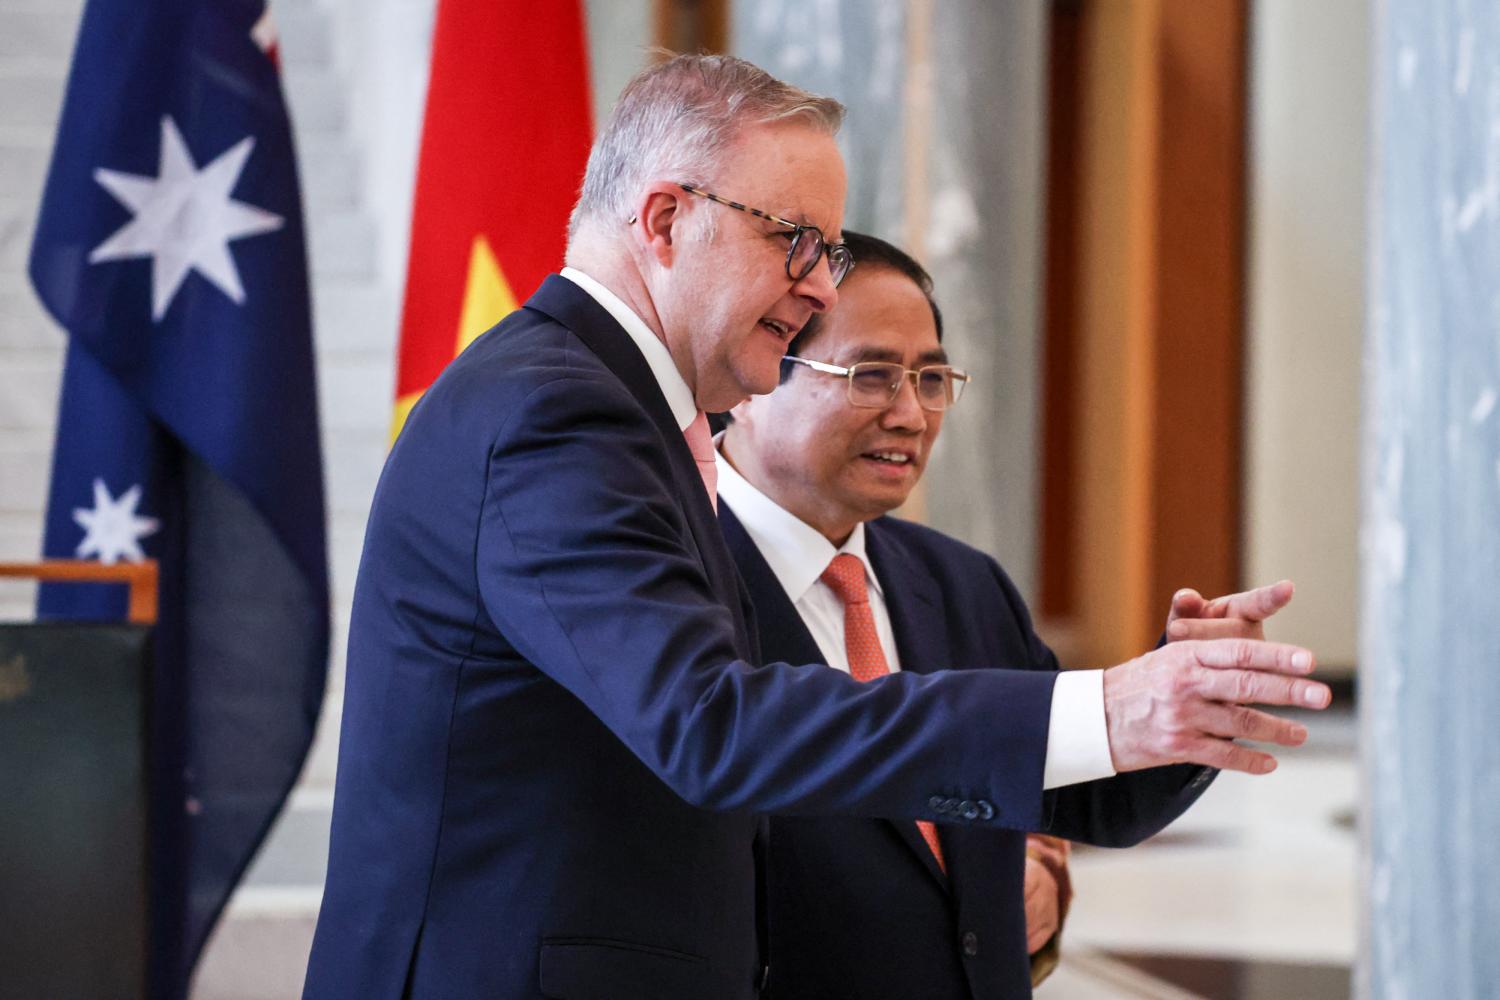 Vietnam Prime Minister Pham Minh Chinh talks with Australian Prime Minister Anthony Albanese during an official welcoming ceremony at Parliament House in Canberra on March 7, 2024. (Getty/David Gray)